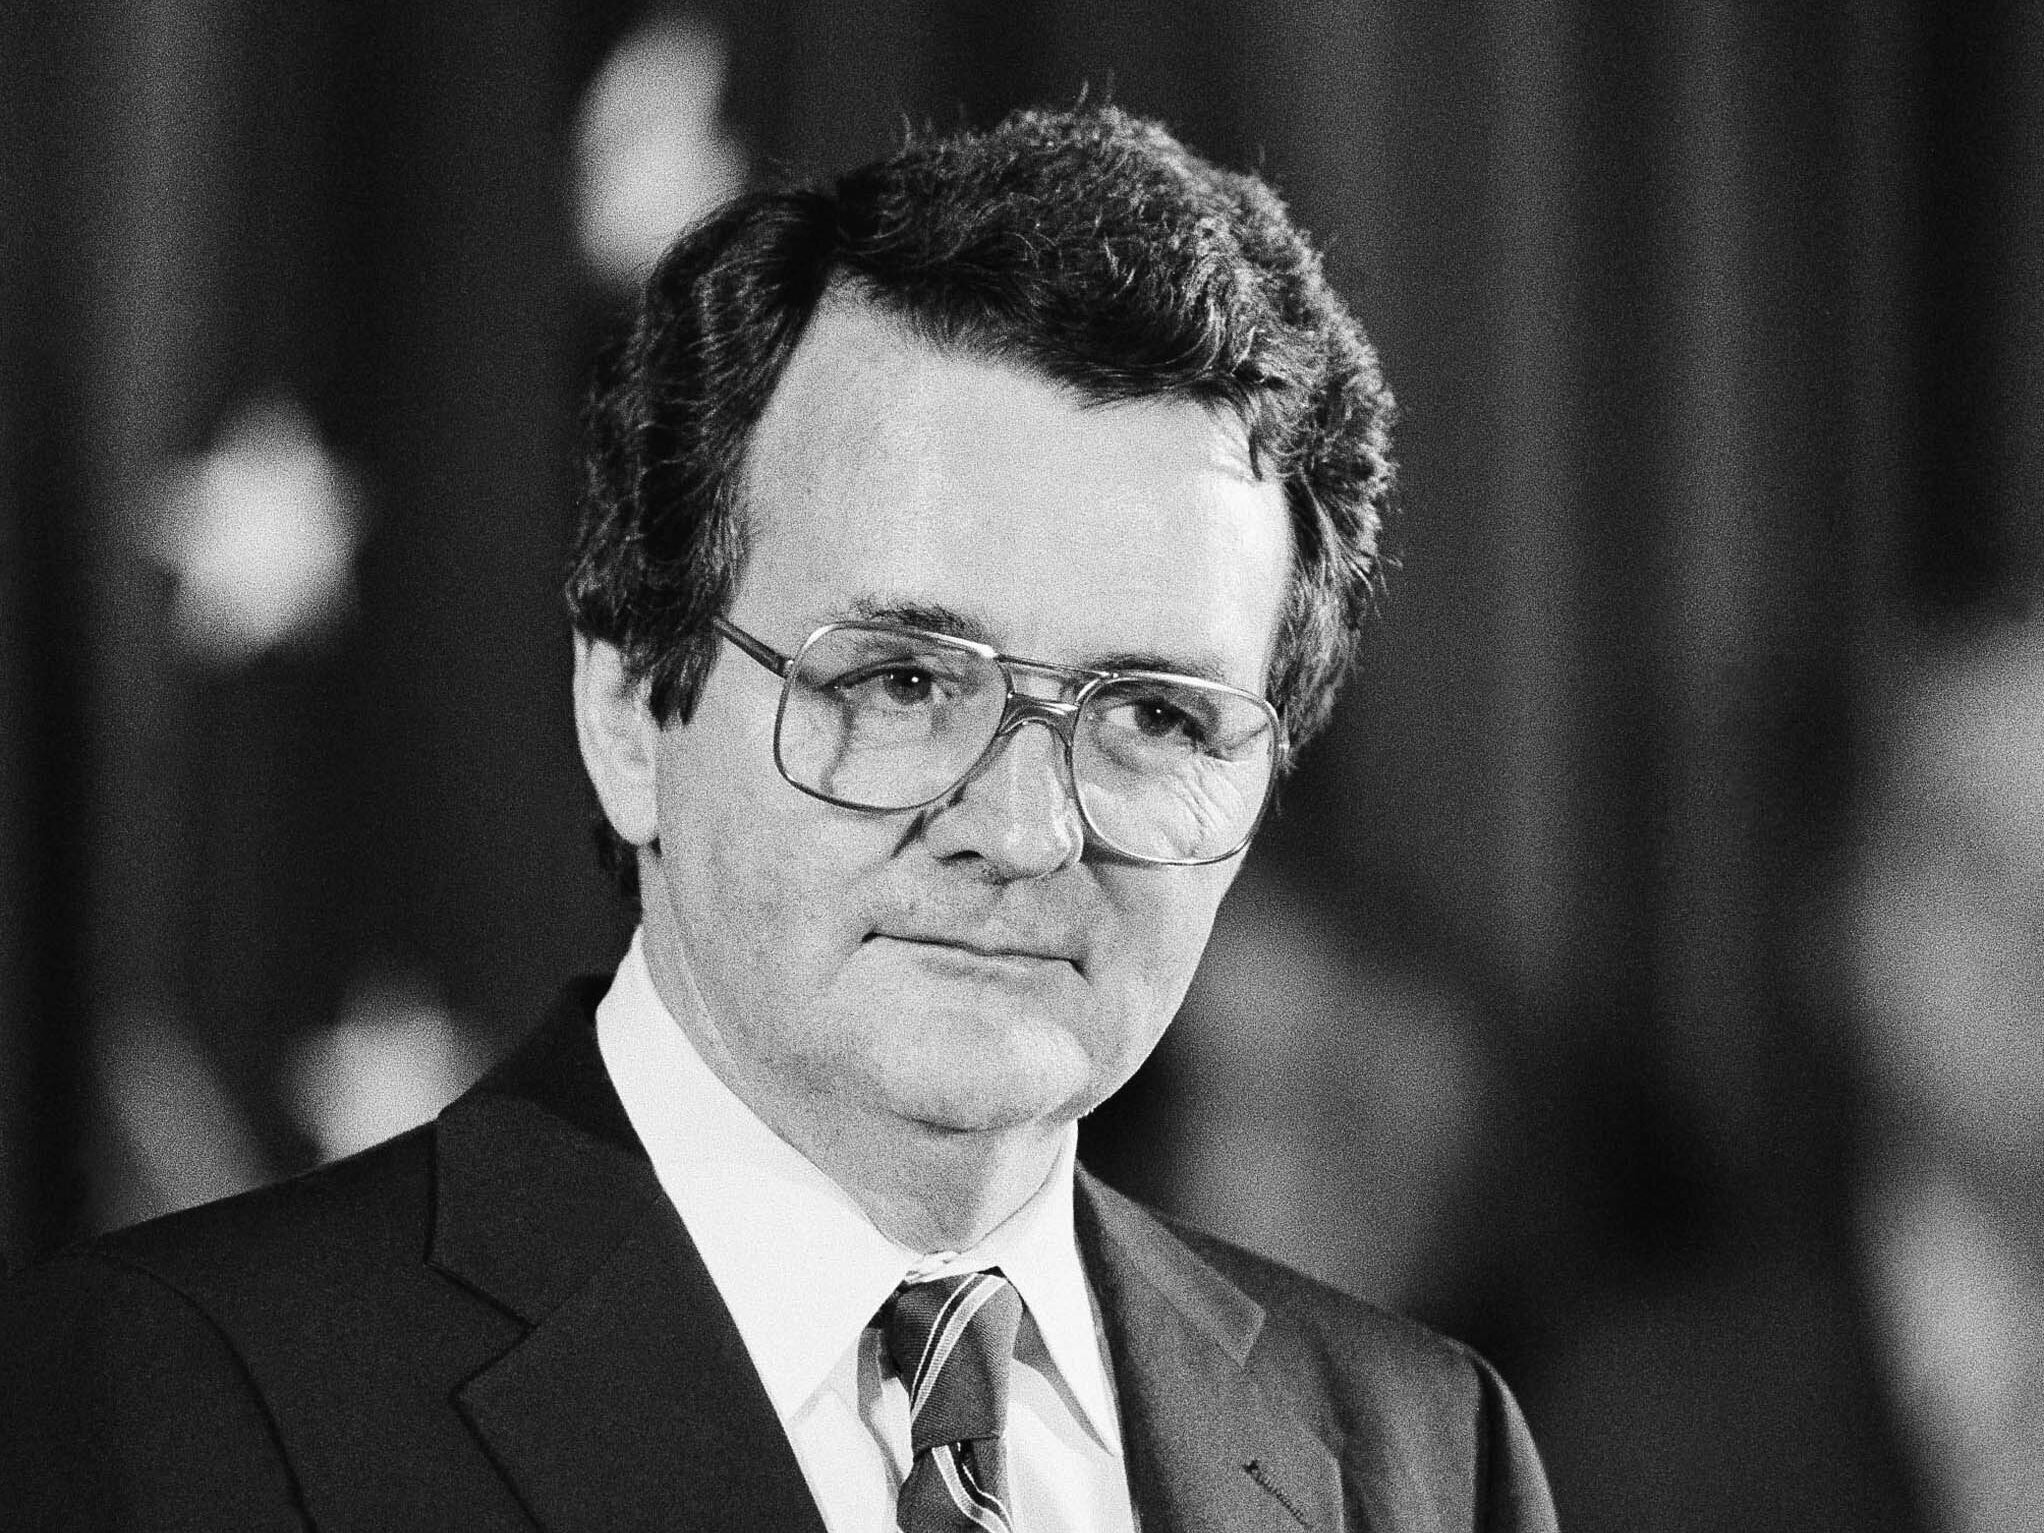 Donovan at the height of his legal ordeals in 1982